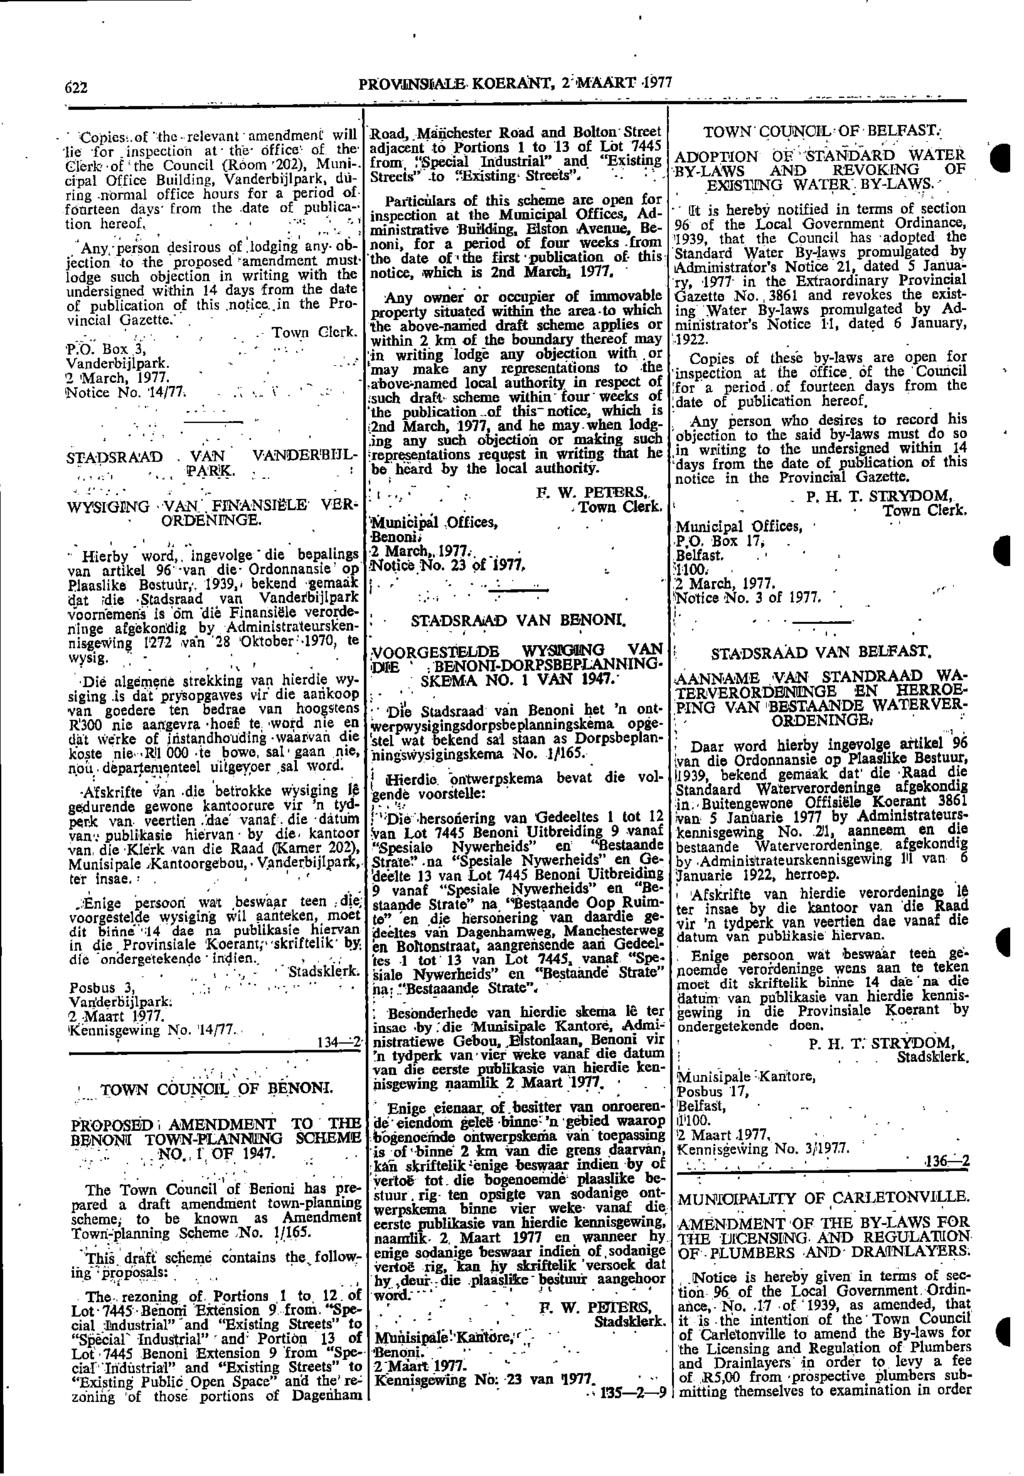 622 PtOVNSALEKOERANT 2:MAART 4977 TOWN COUNCL OF BELFAST the Council (Room 202) Muni from lspecial ndustrial" and "Existing ADOPTON OF STANDARD WATER Copiestof the relevant amendment will